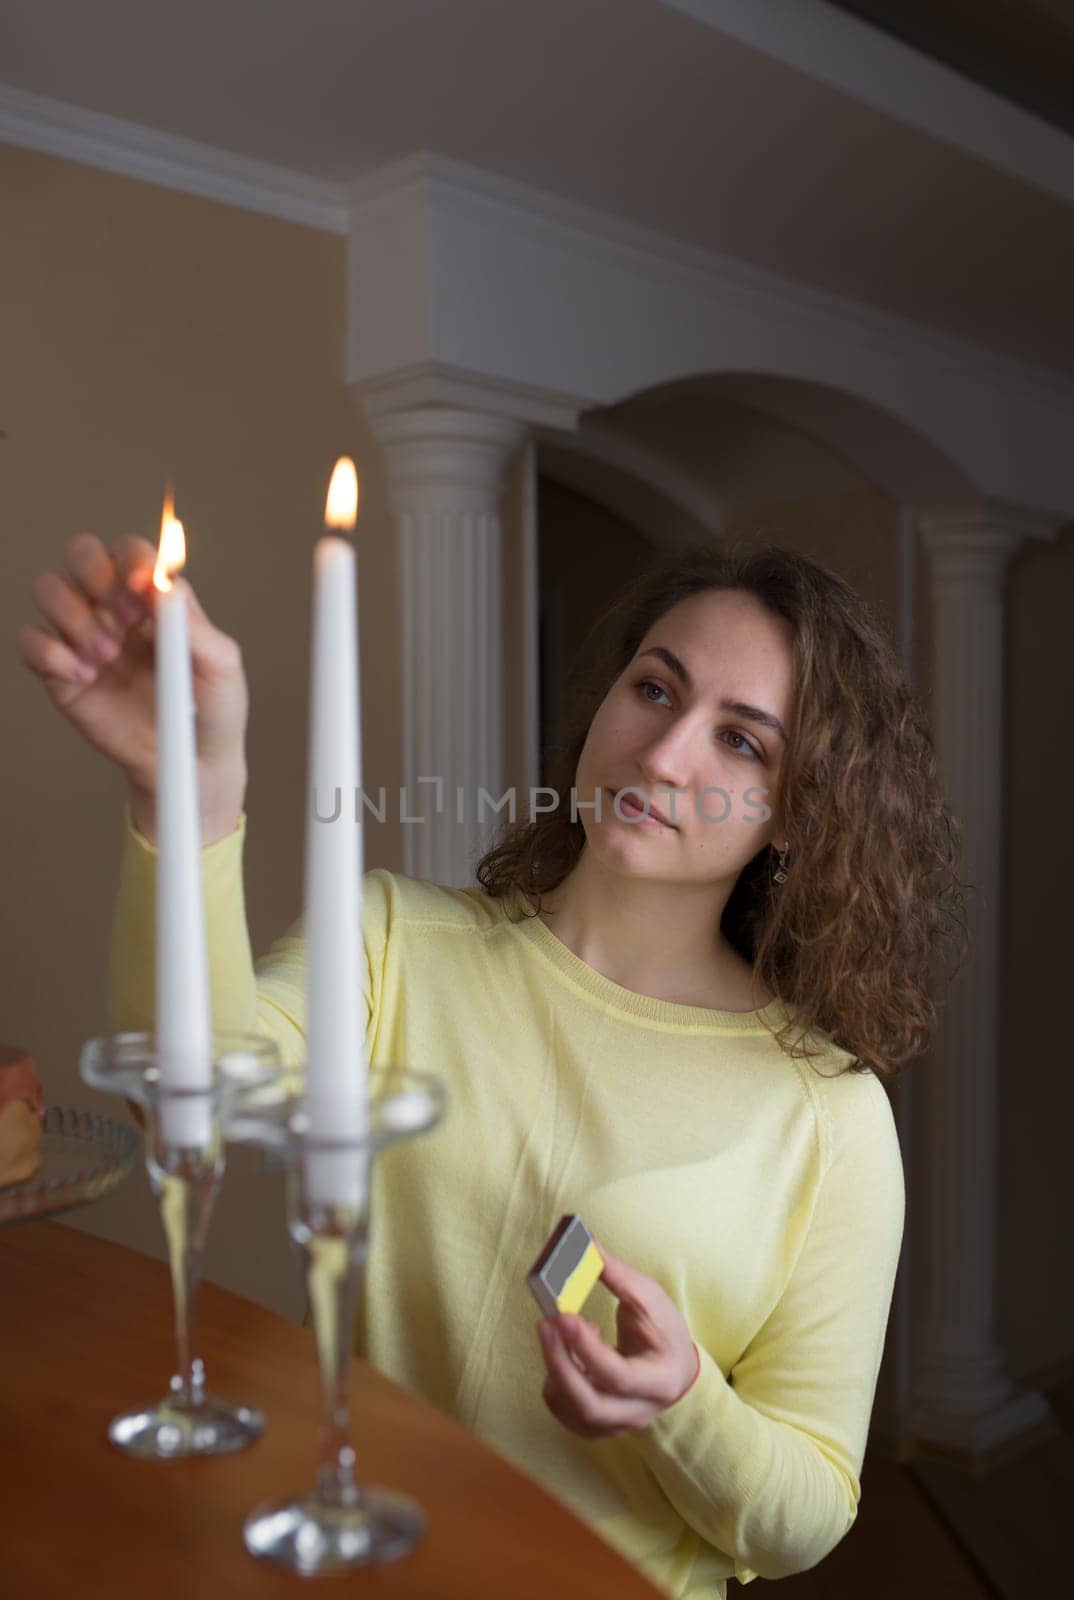 young girl with long hair lights candles in the kitchen at home by aprilphoto